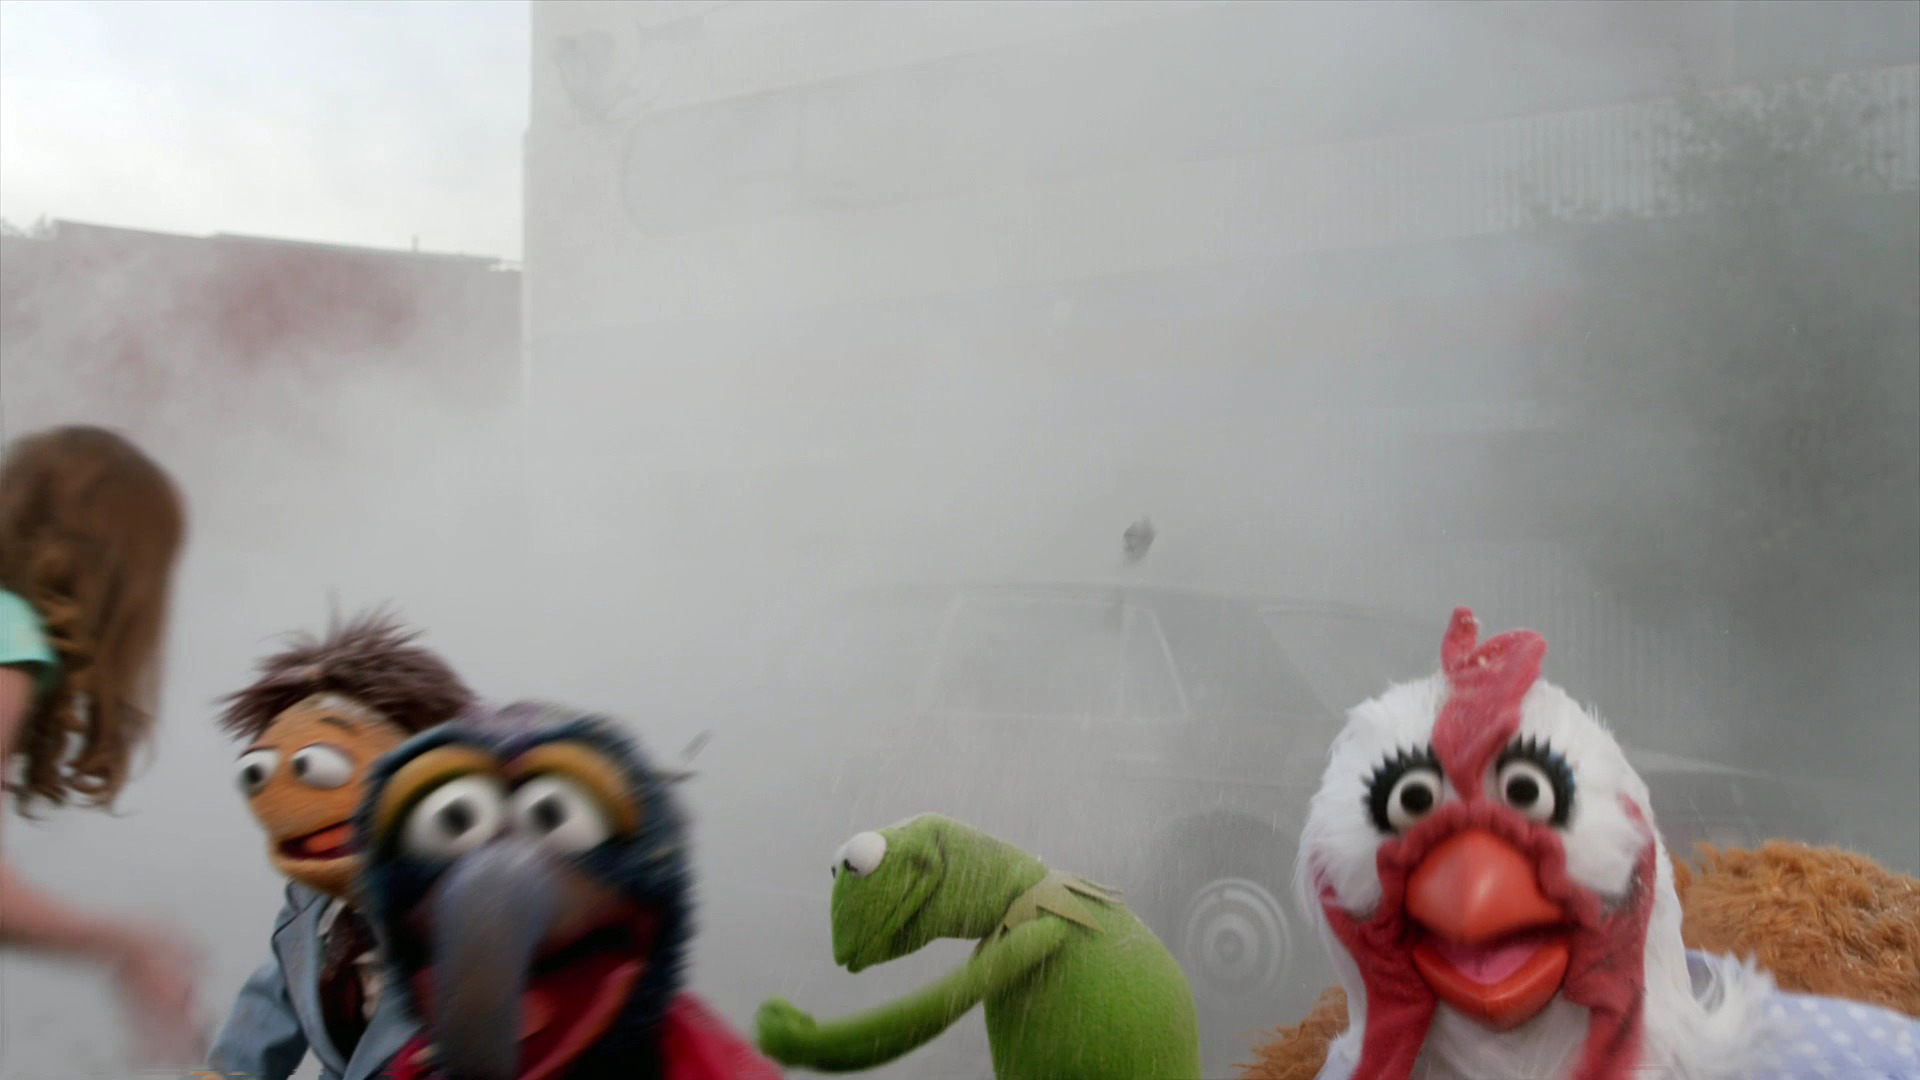 The Muppets Desktop Wallpaper For HD Widescreen And Mobile